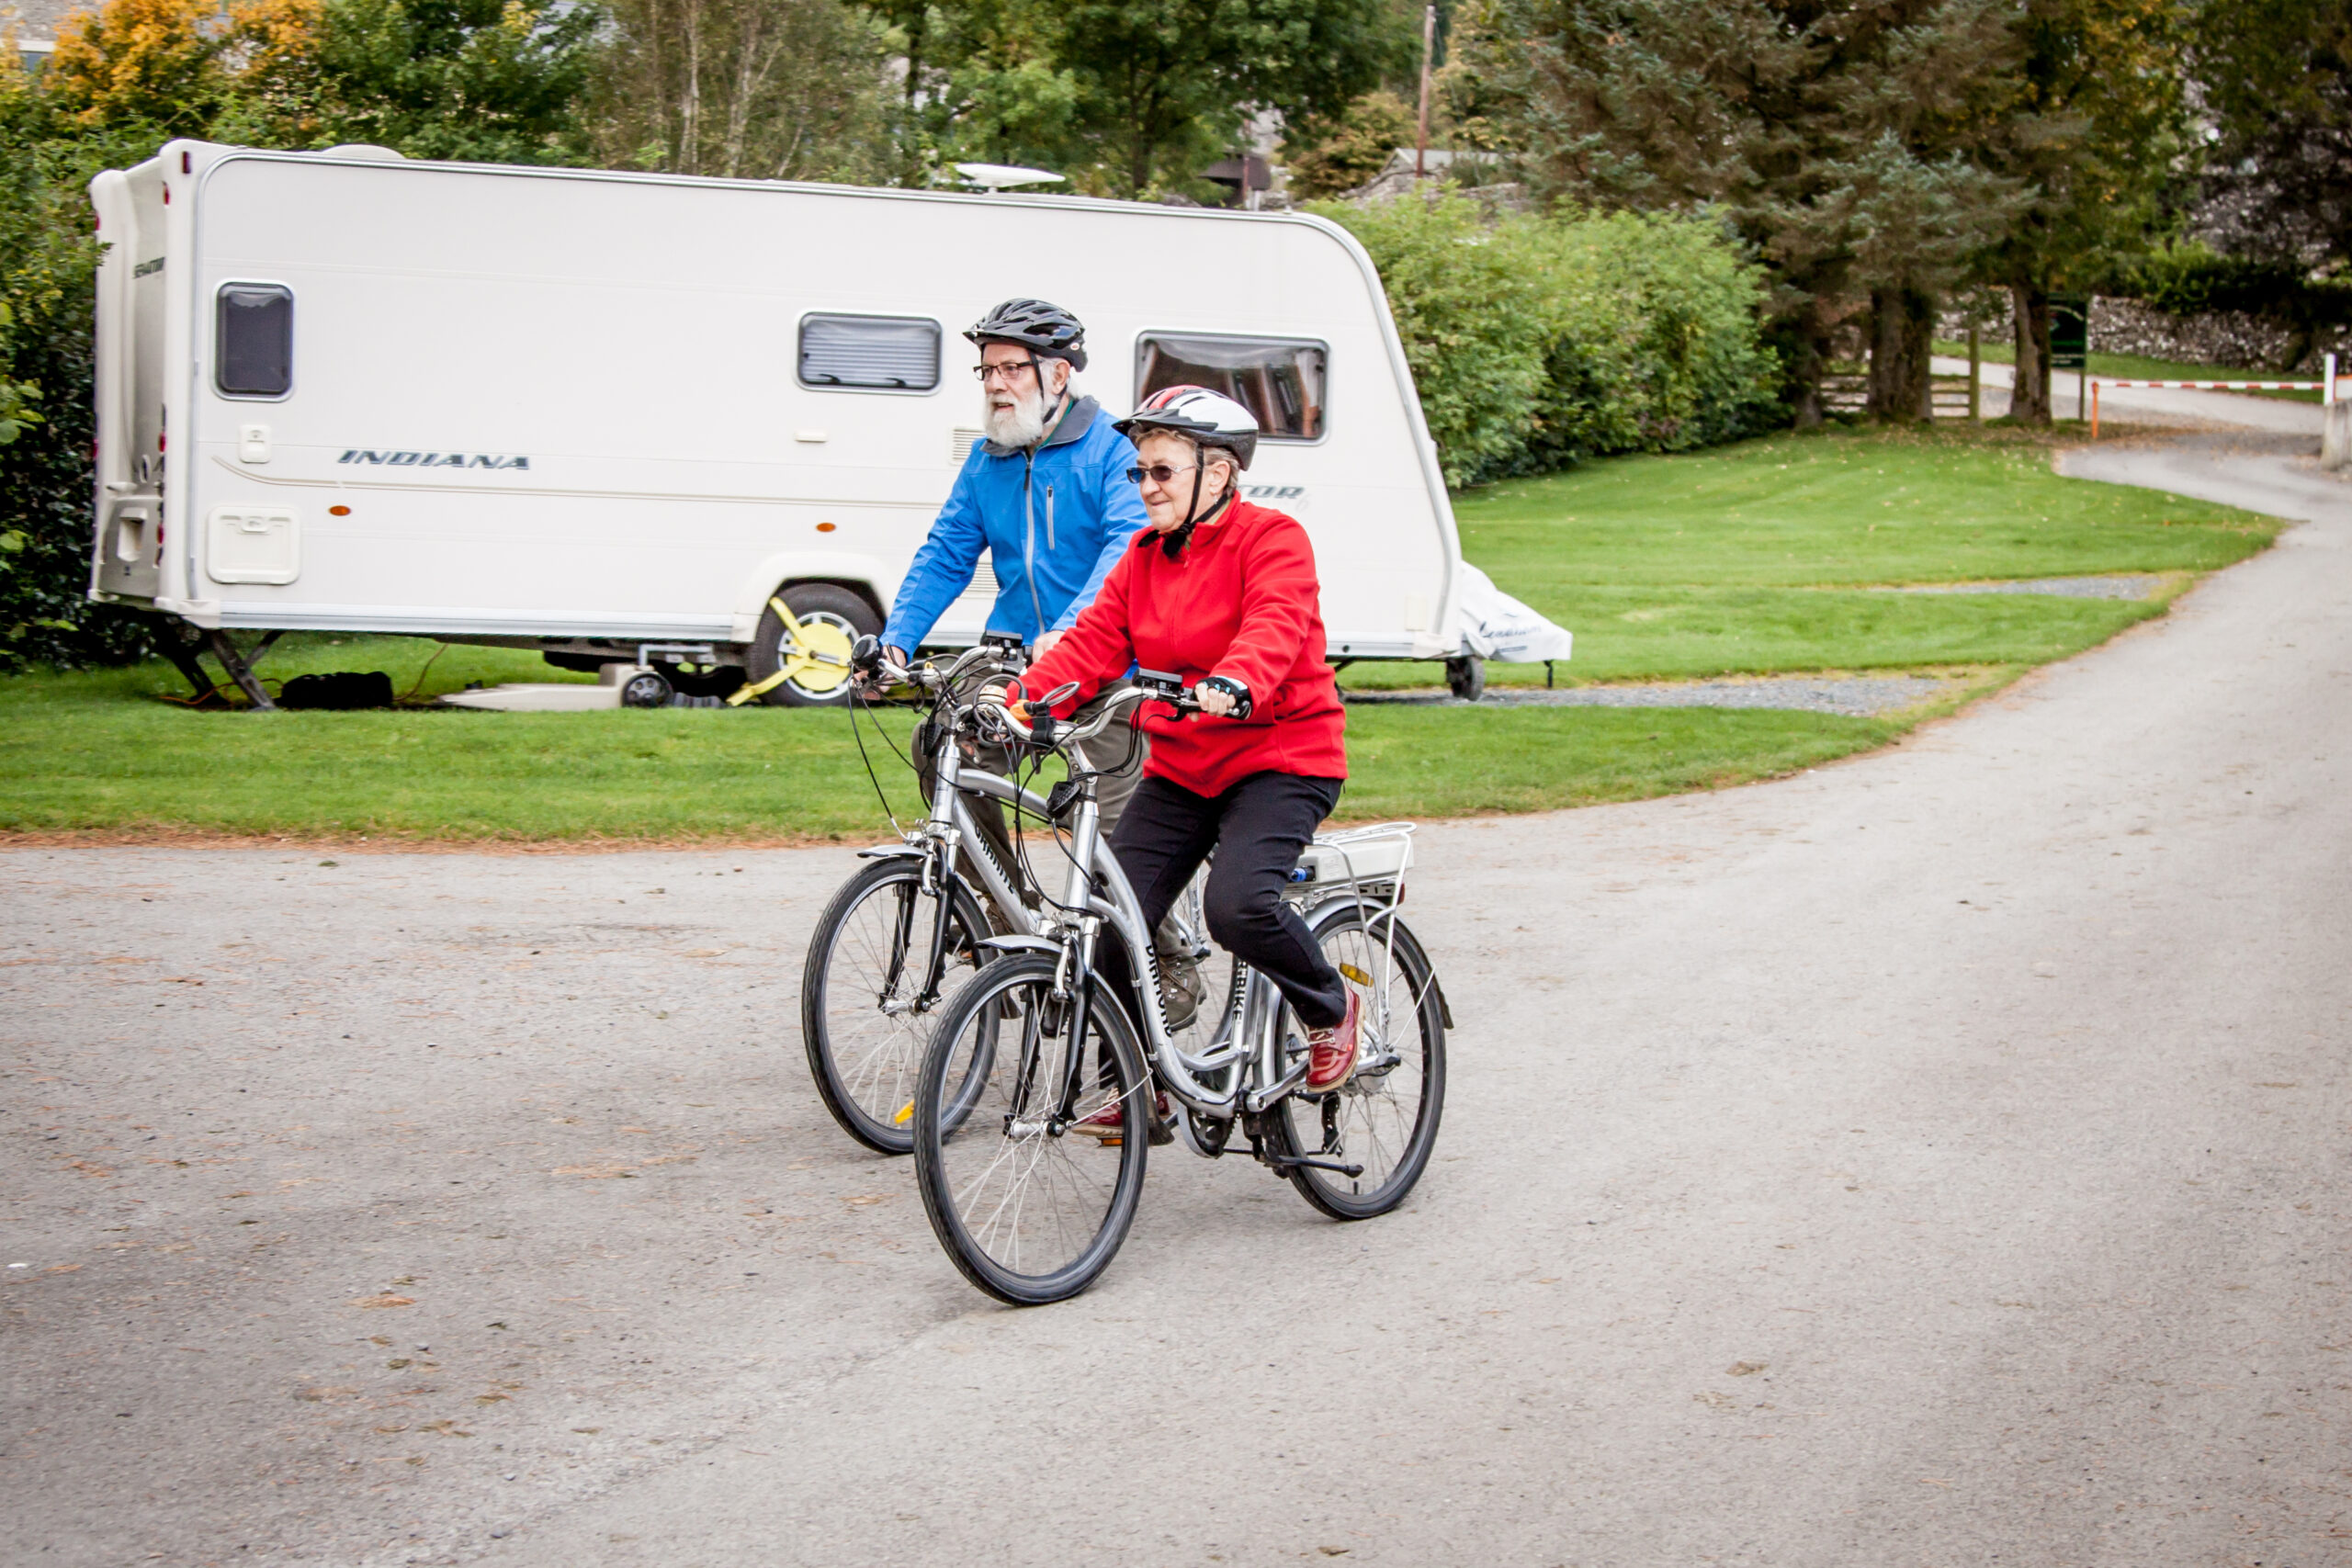 Cyclists on Electric bikes passing a caravan